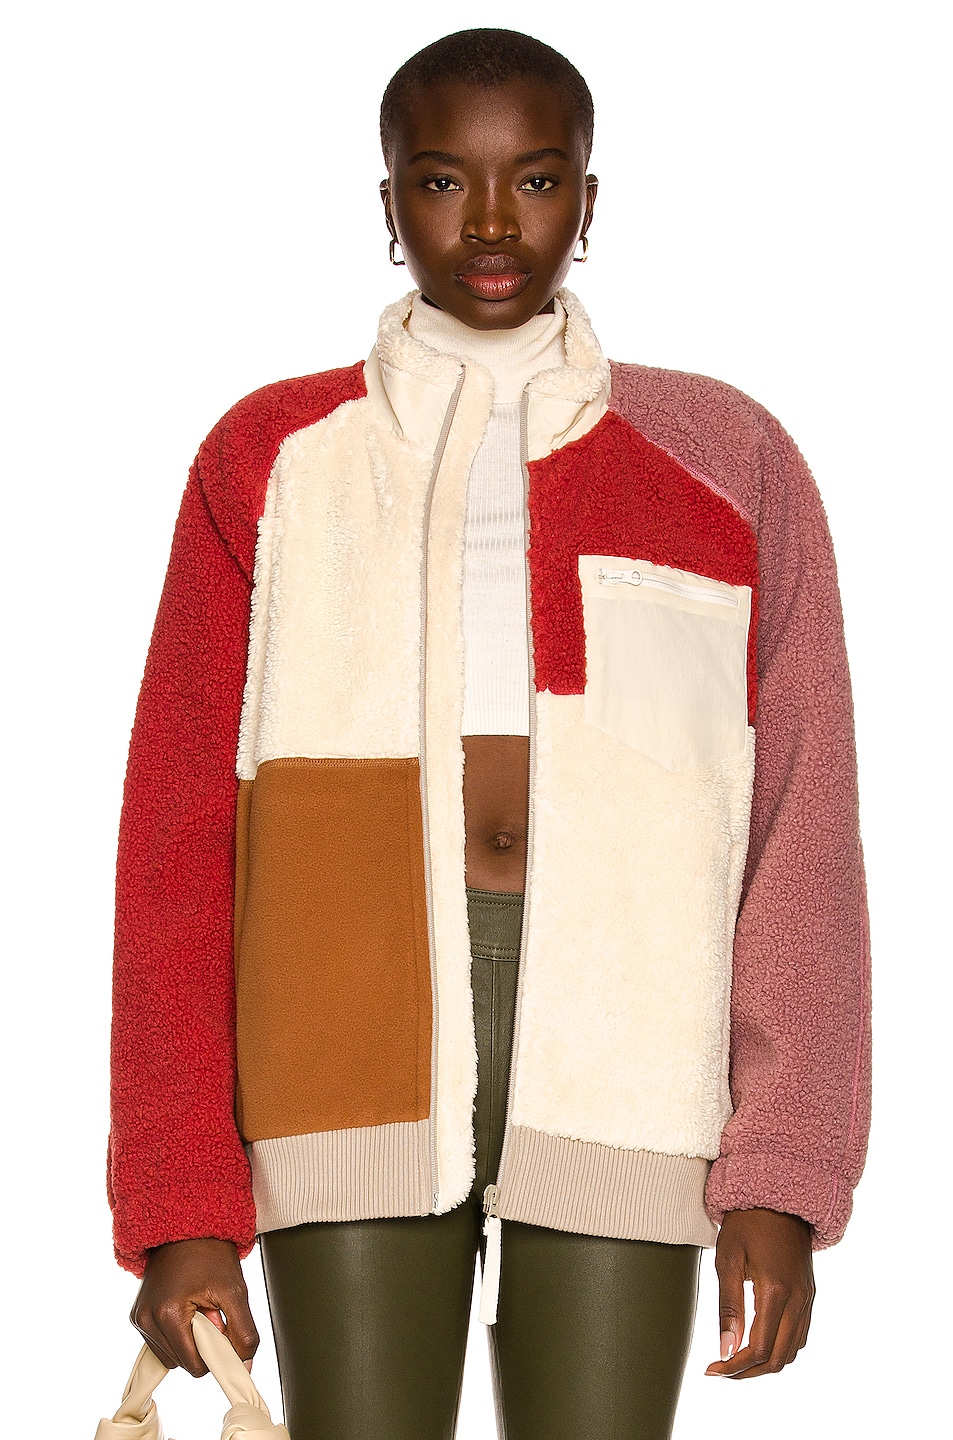 Image 1 of Helmut Lang Patchwork Fleece Jacket in Winter White, Dusty Pink, Coral Red, & Cream